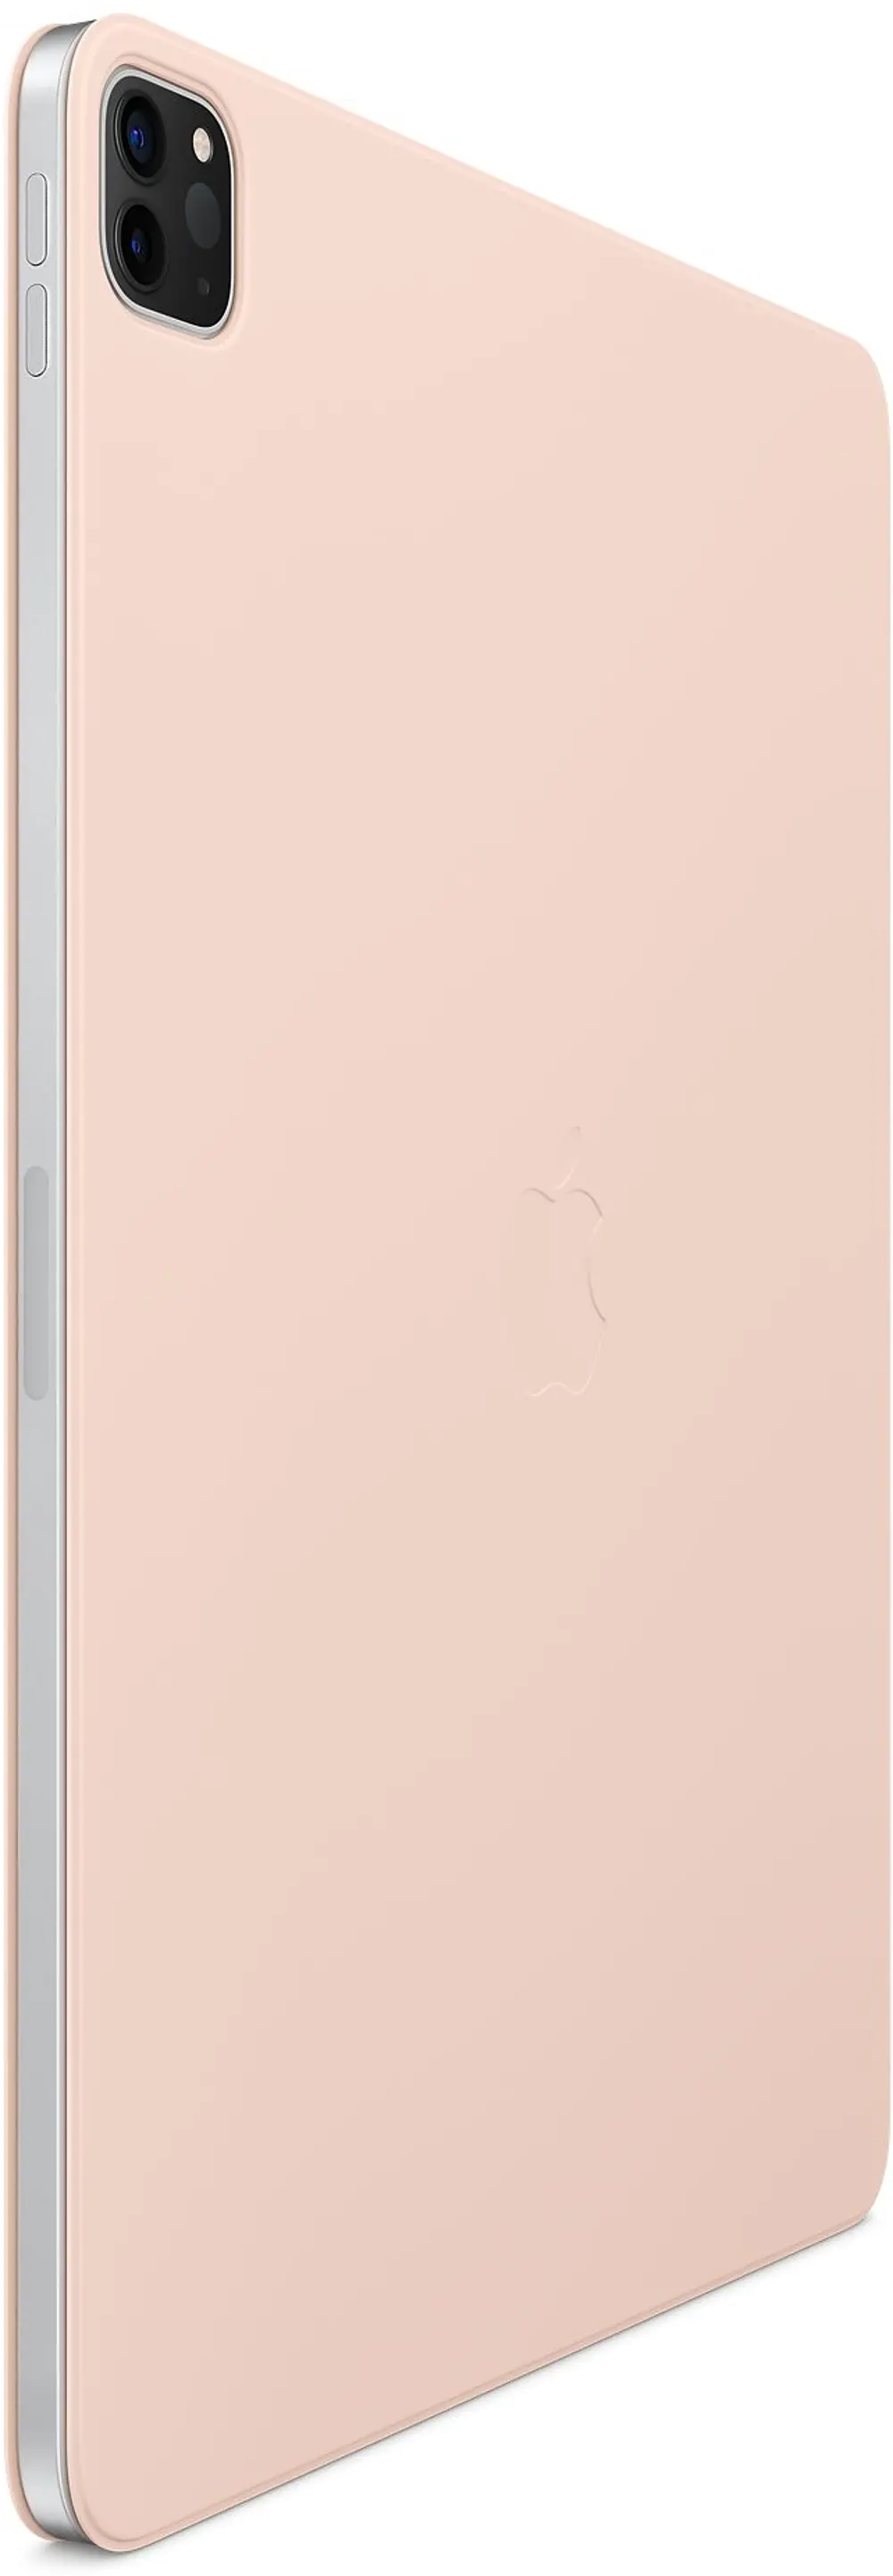 MXTA2ZM/A Smart Folio Case for iPad Pro 12.9  Inch - Pink Sand-1